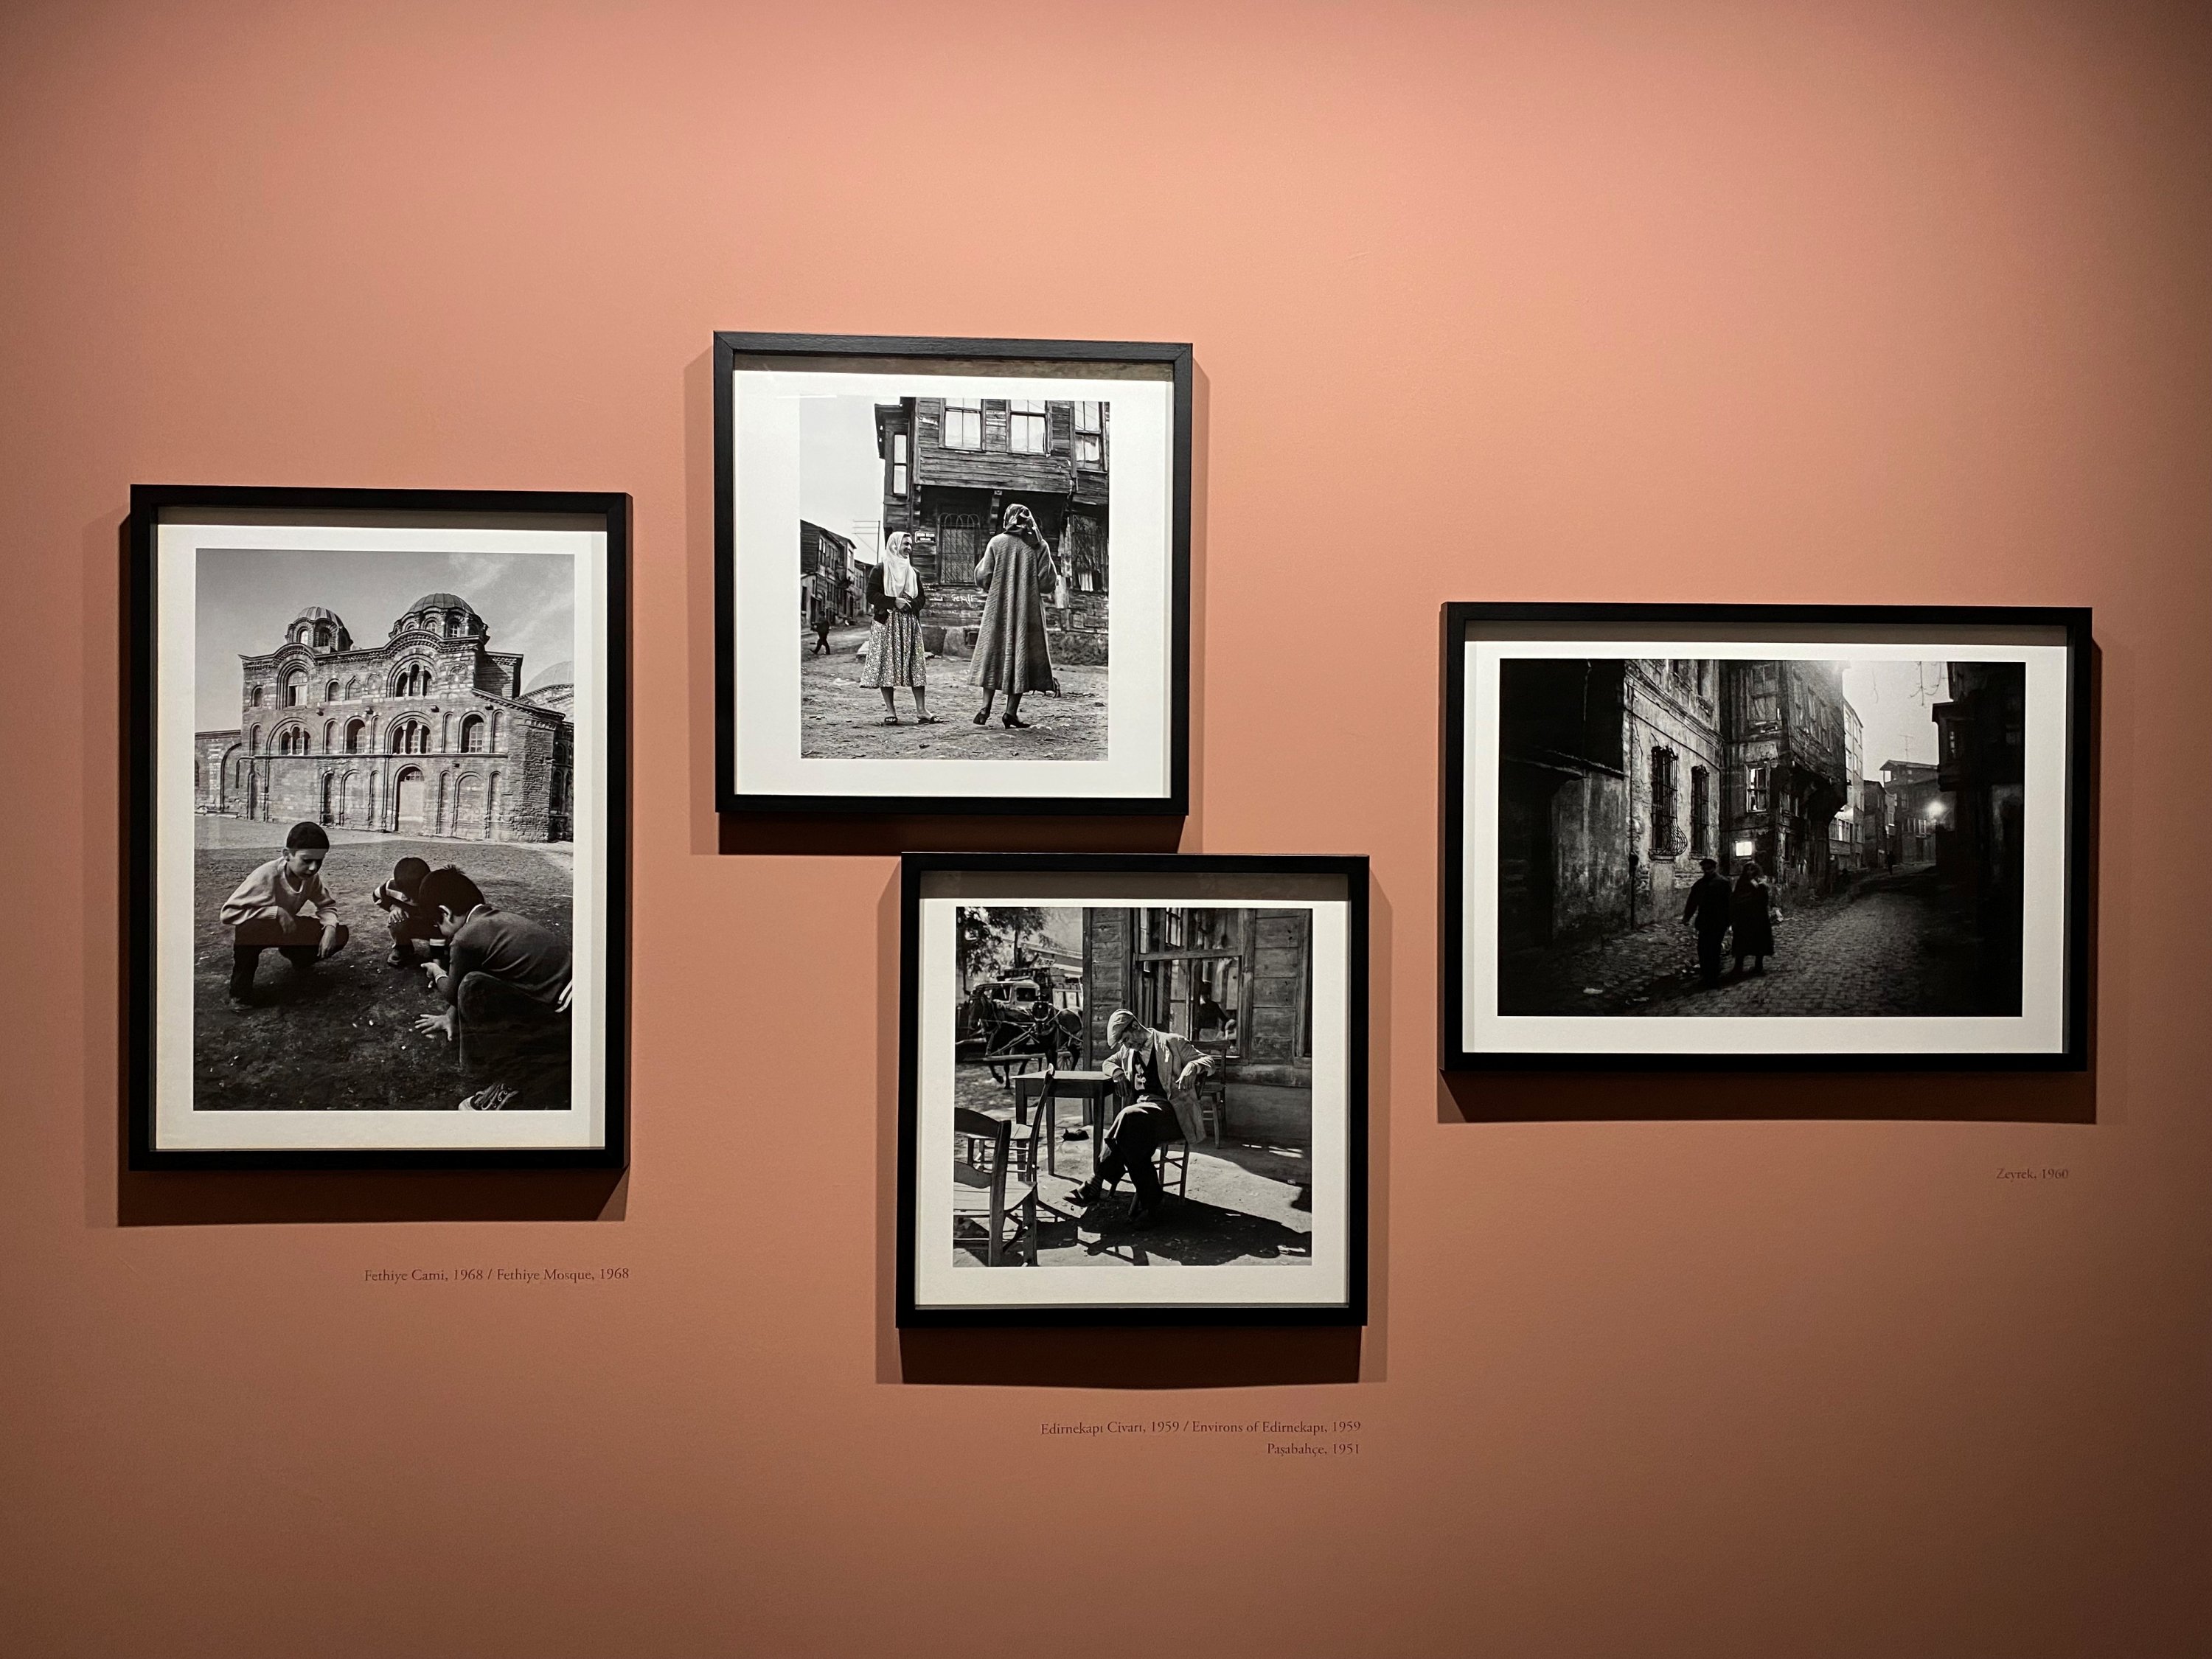 A view of the “Miscellaneous Istanbul” exhibition. (Courtesy of Ara Güler Museum)